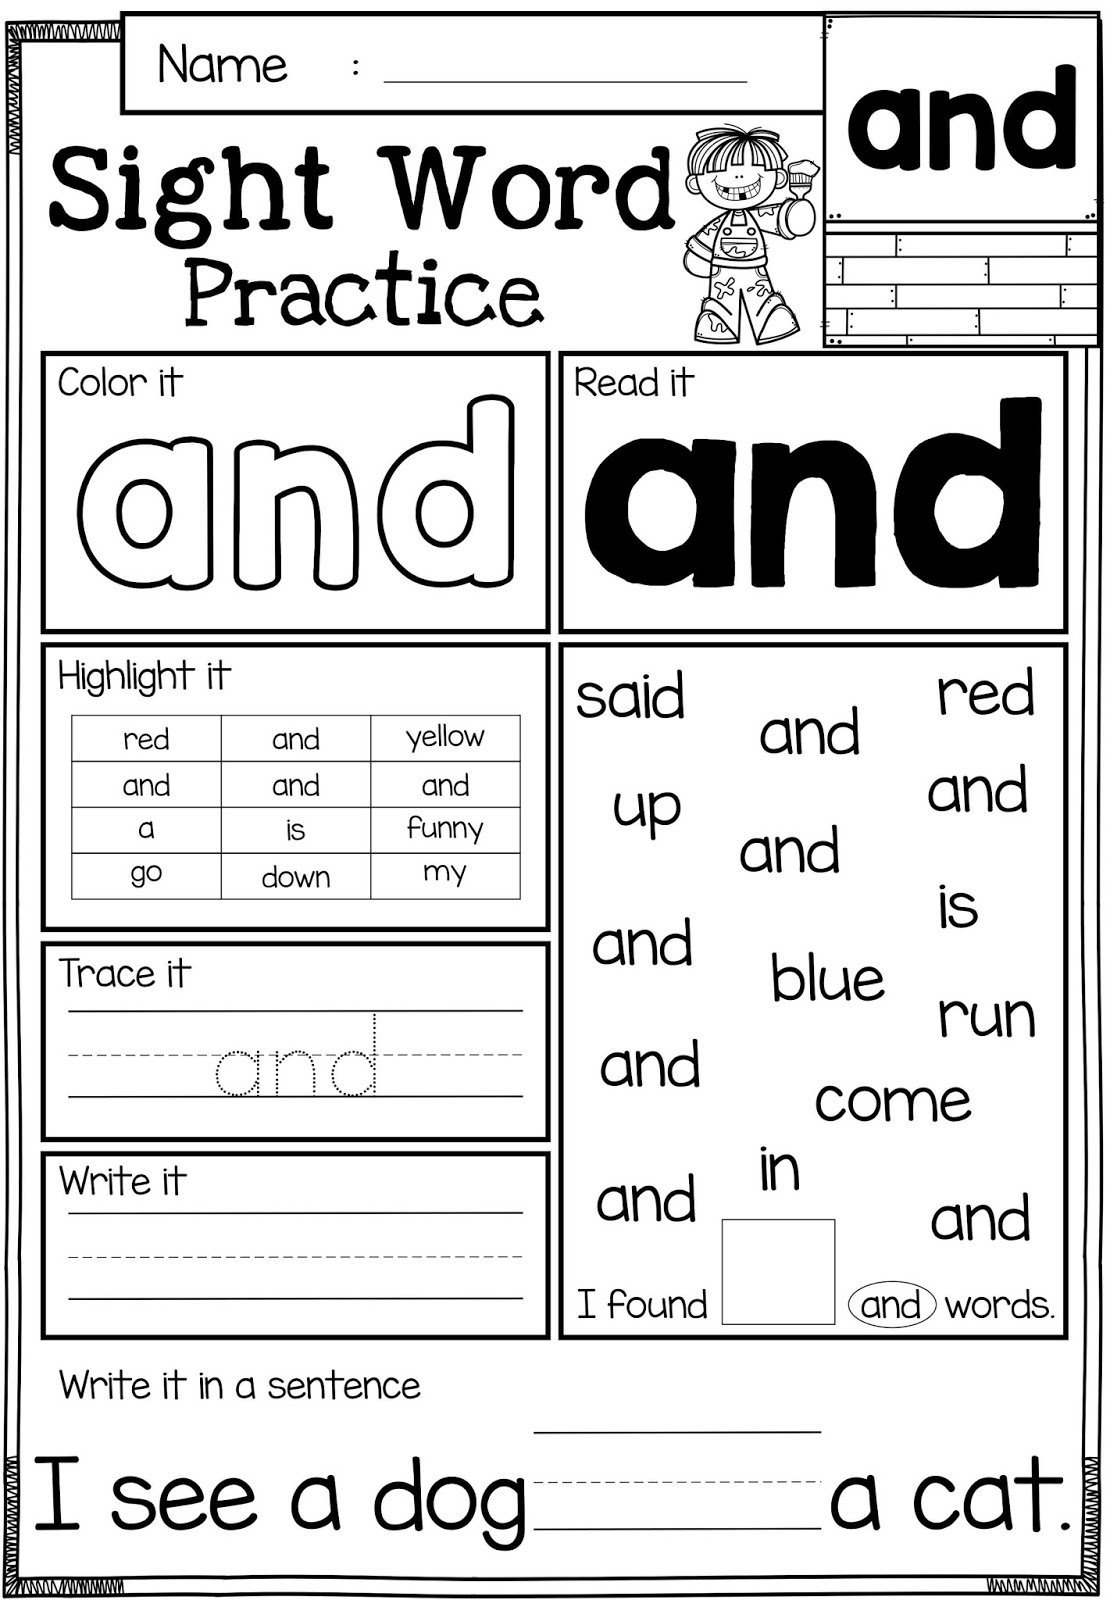 sight-word-games-for-first-grade